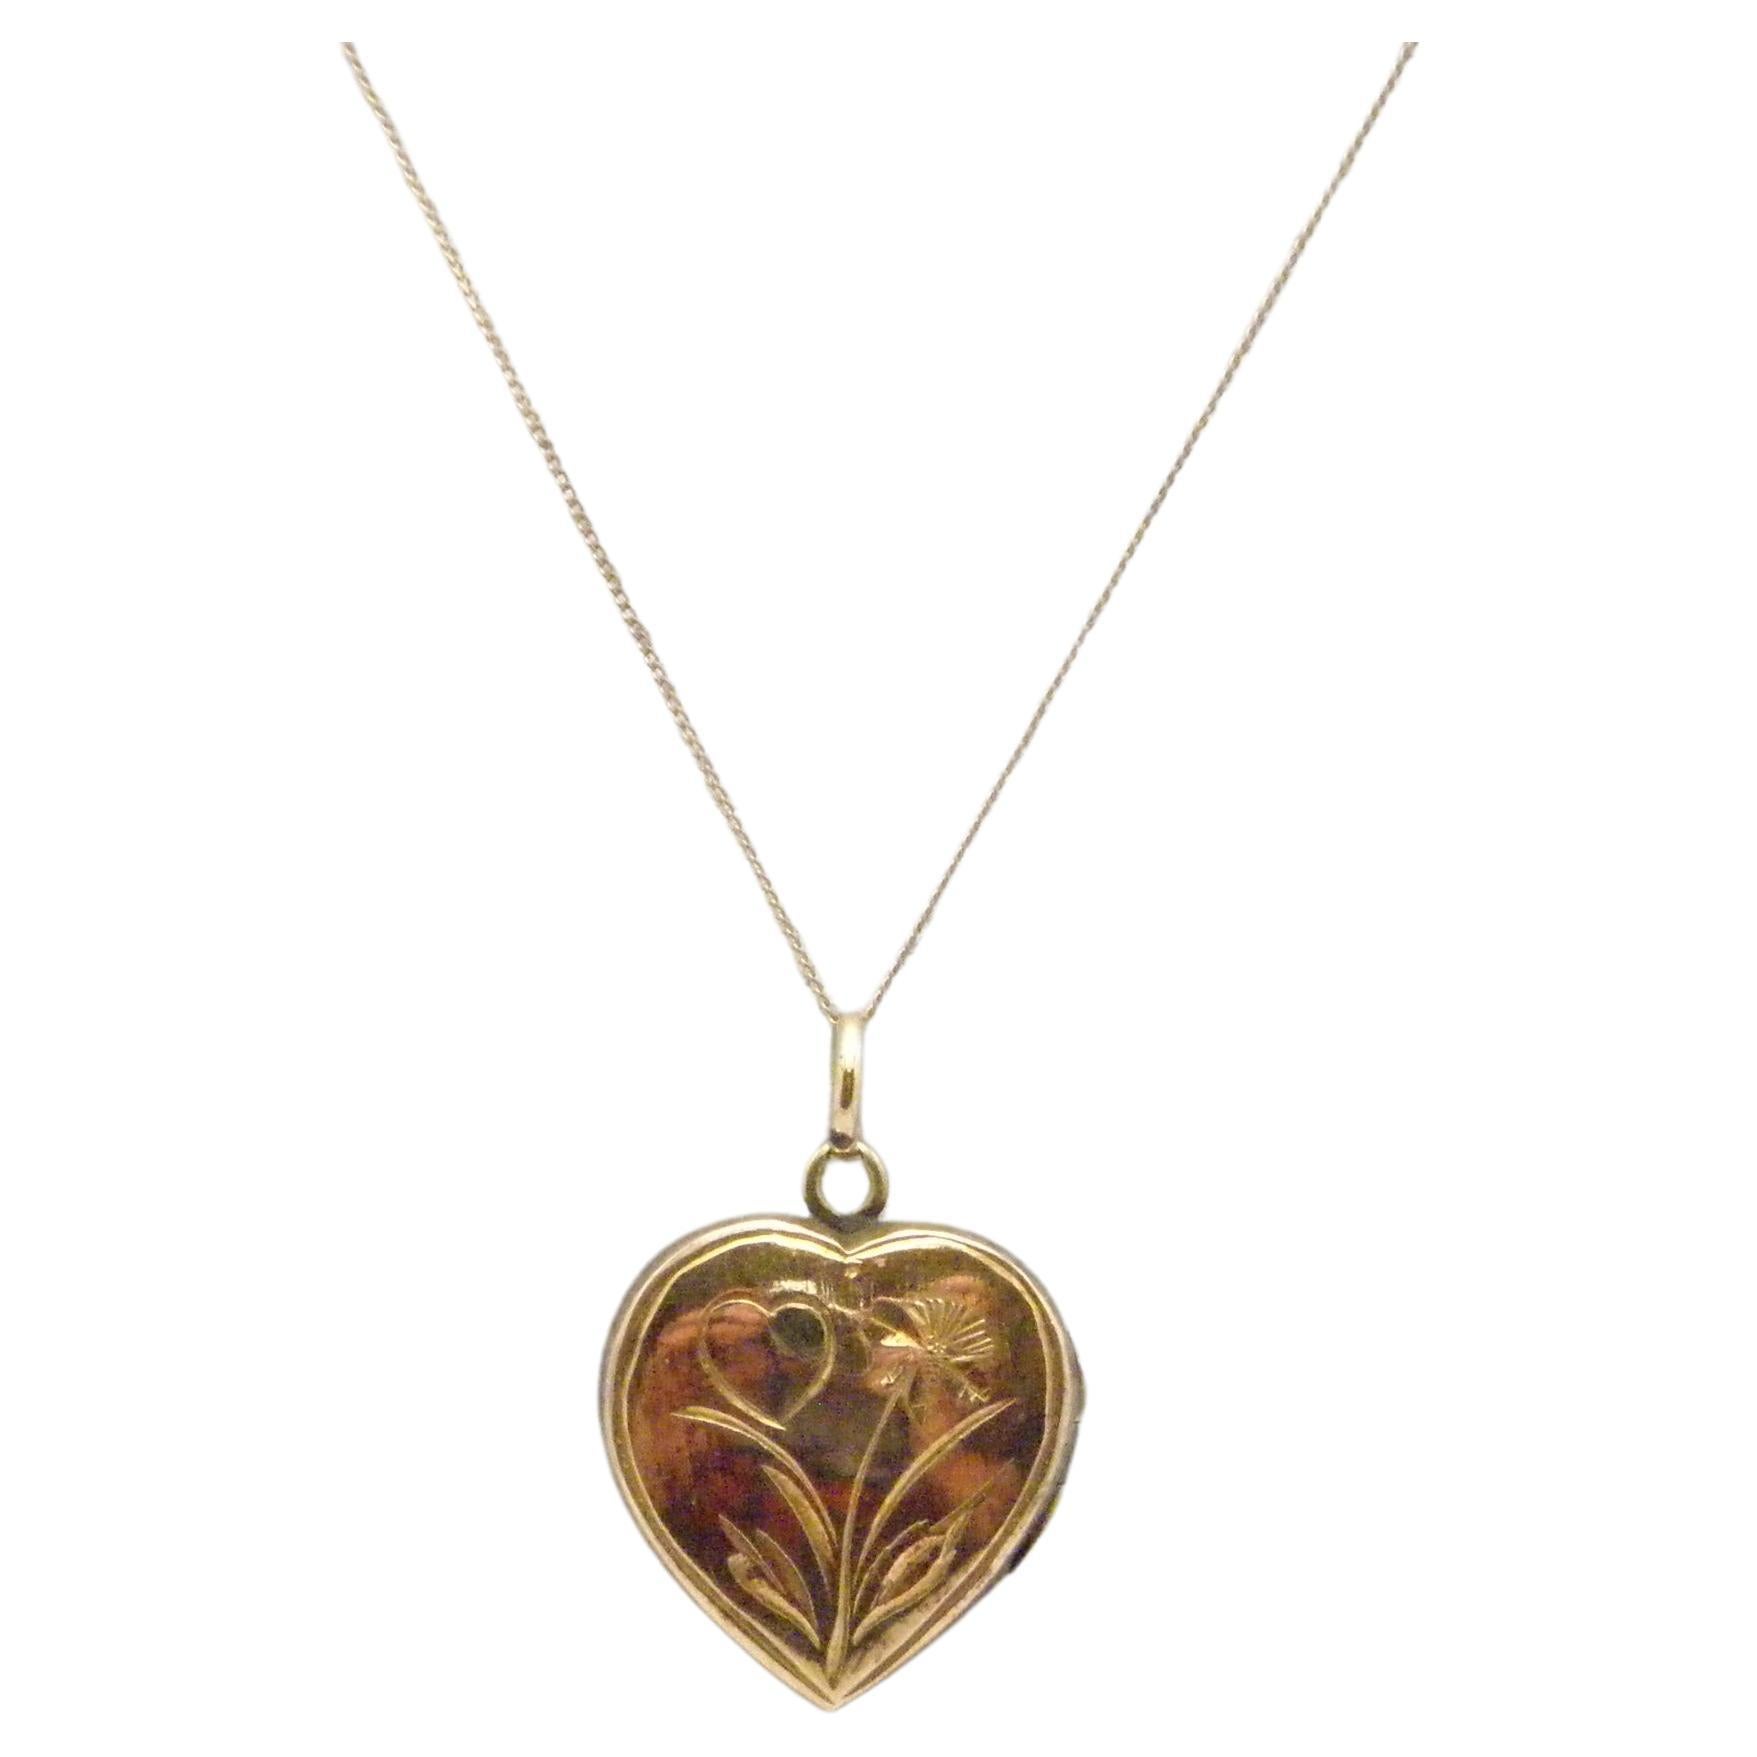 Antique 14ct Rose Gold Heart Locket Pendant Necklace Curb Chain 585 375 18 Inch For Sale